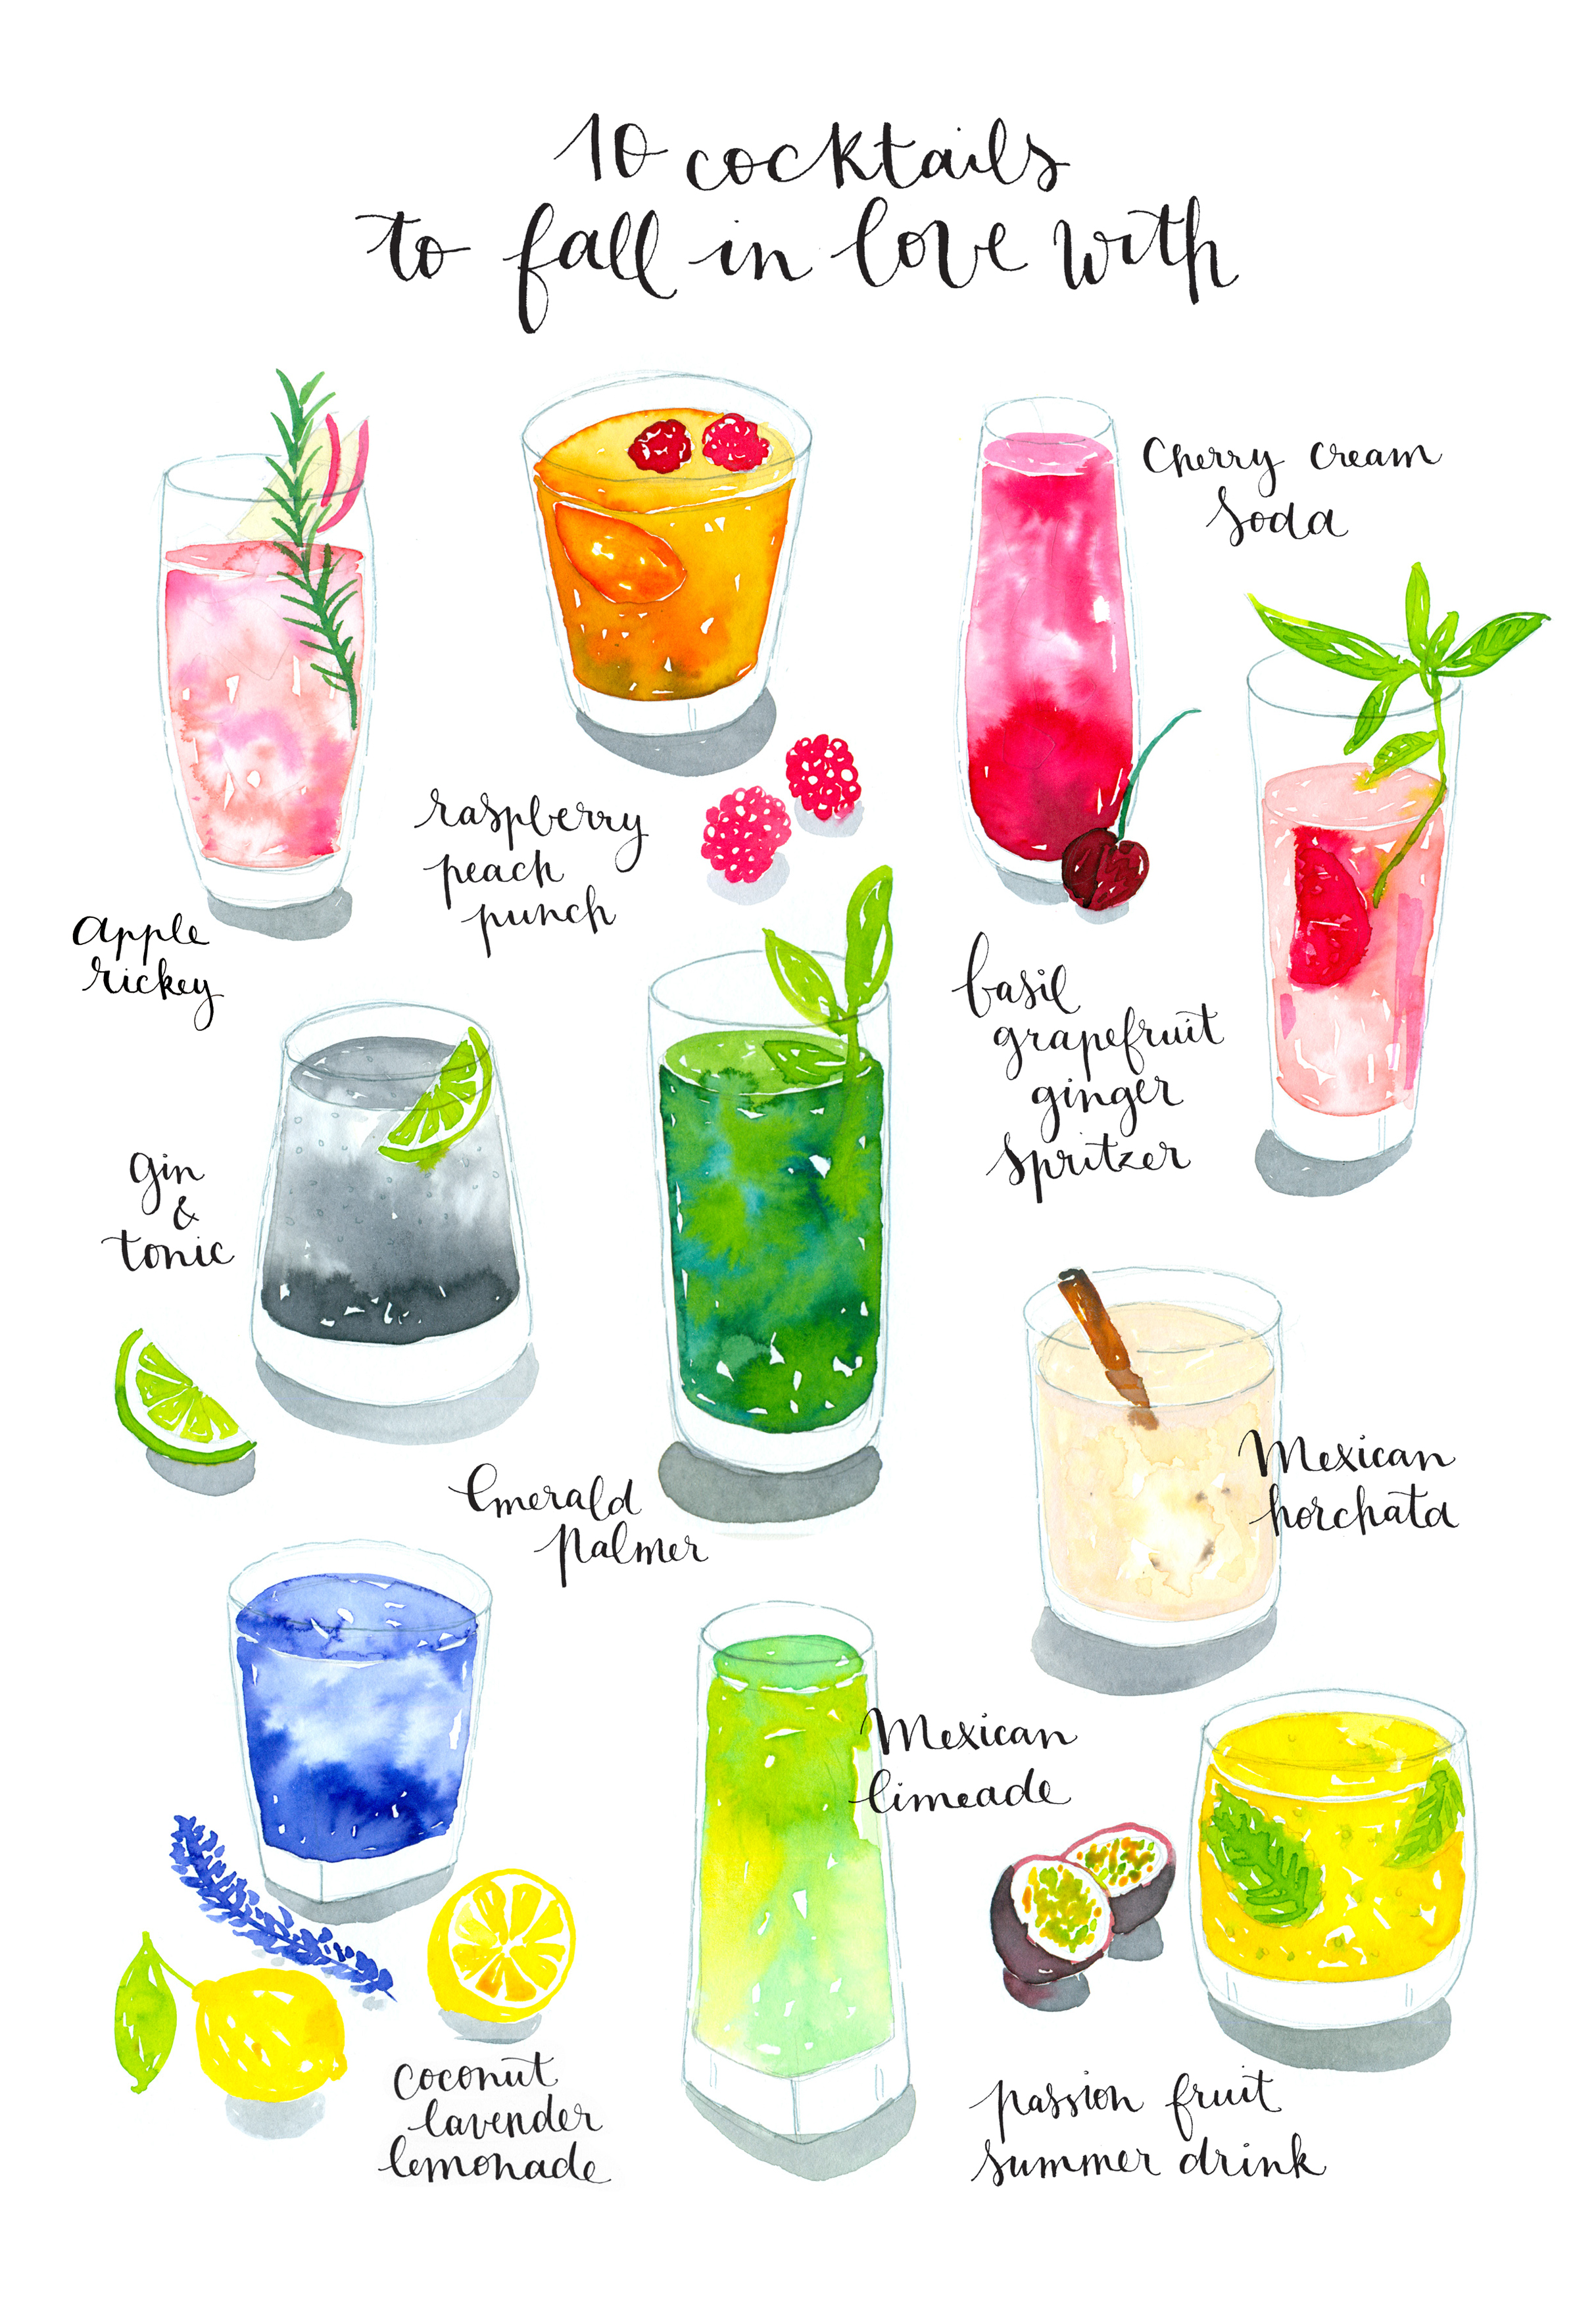 Design Your Own Mixed Drink - Original Illustrations and Recipes